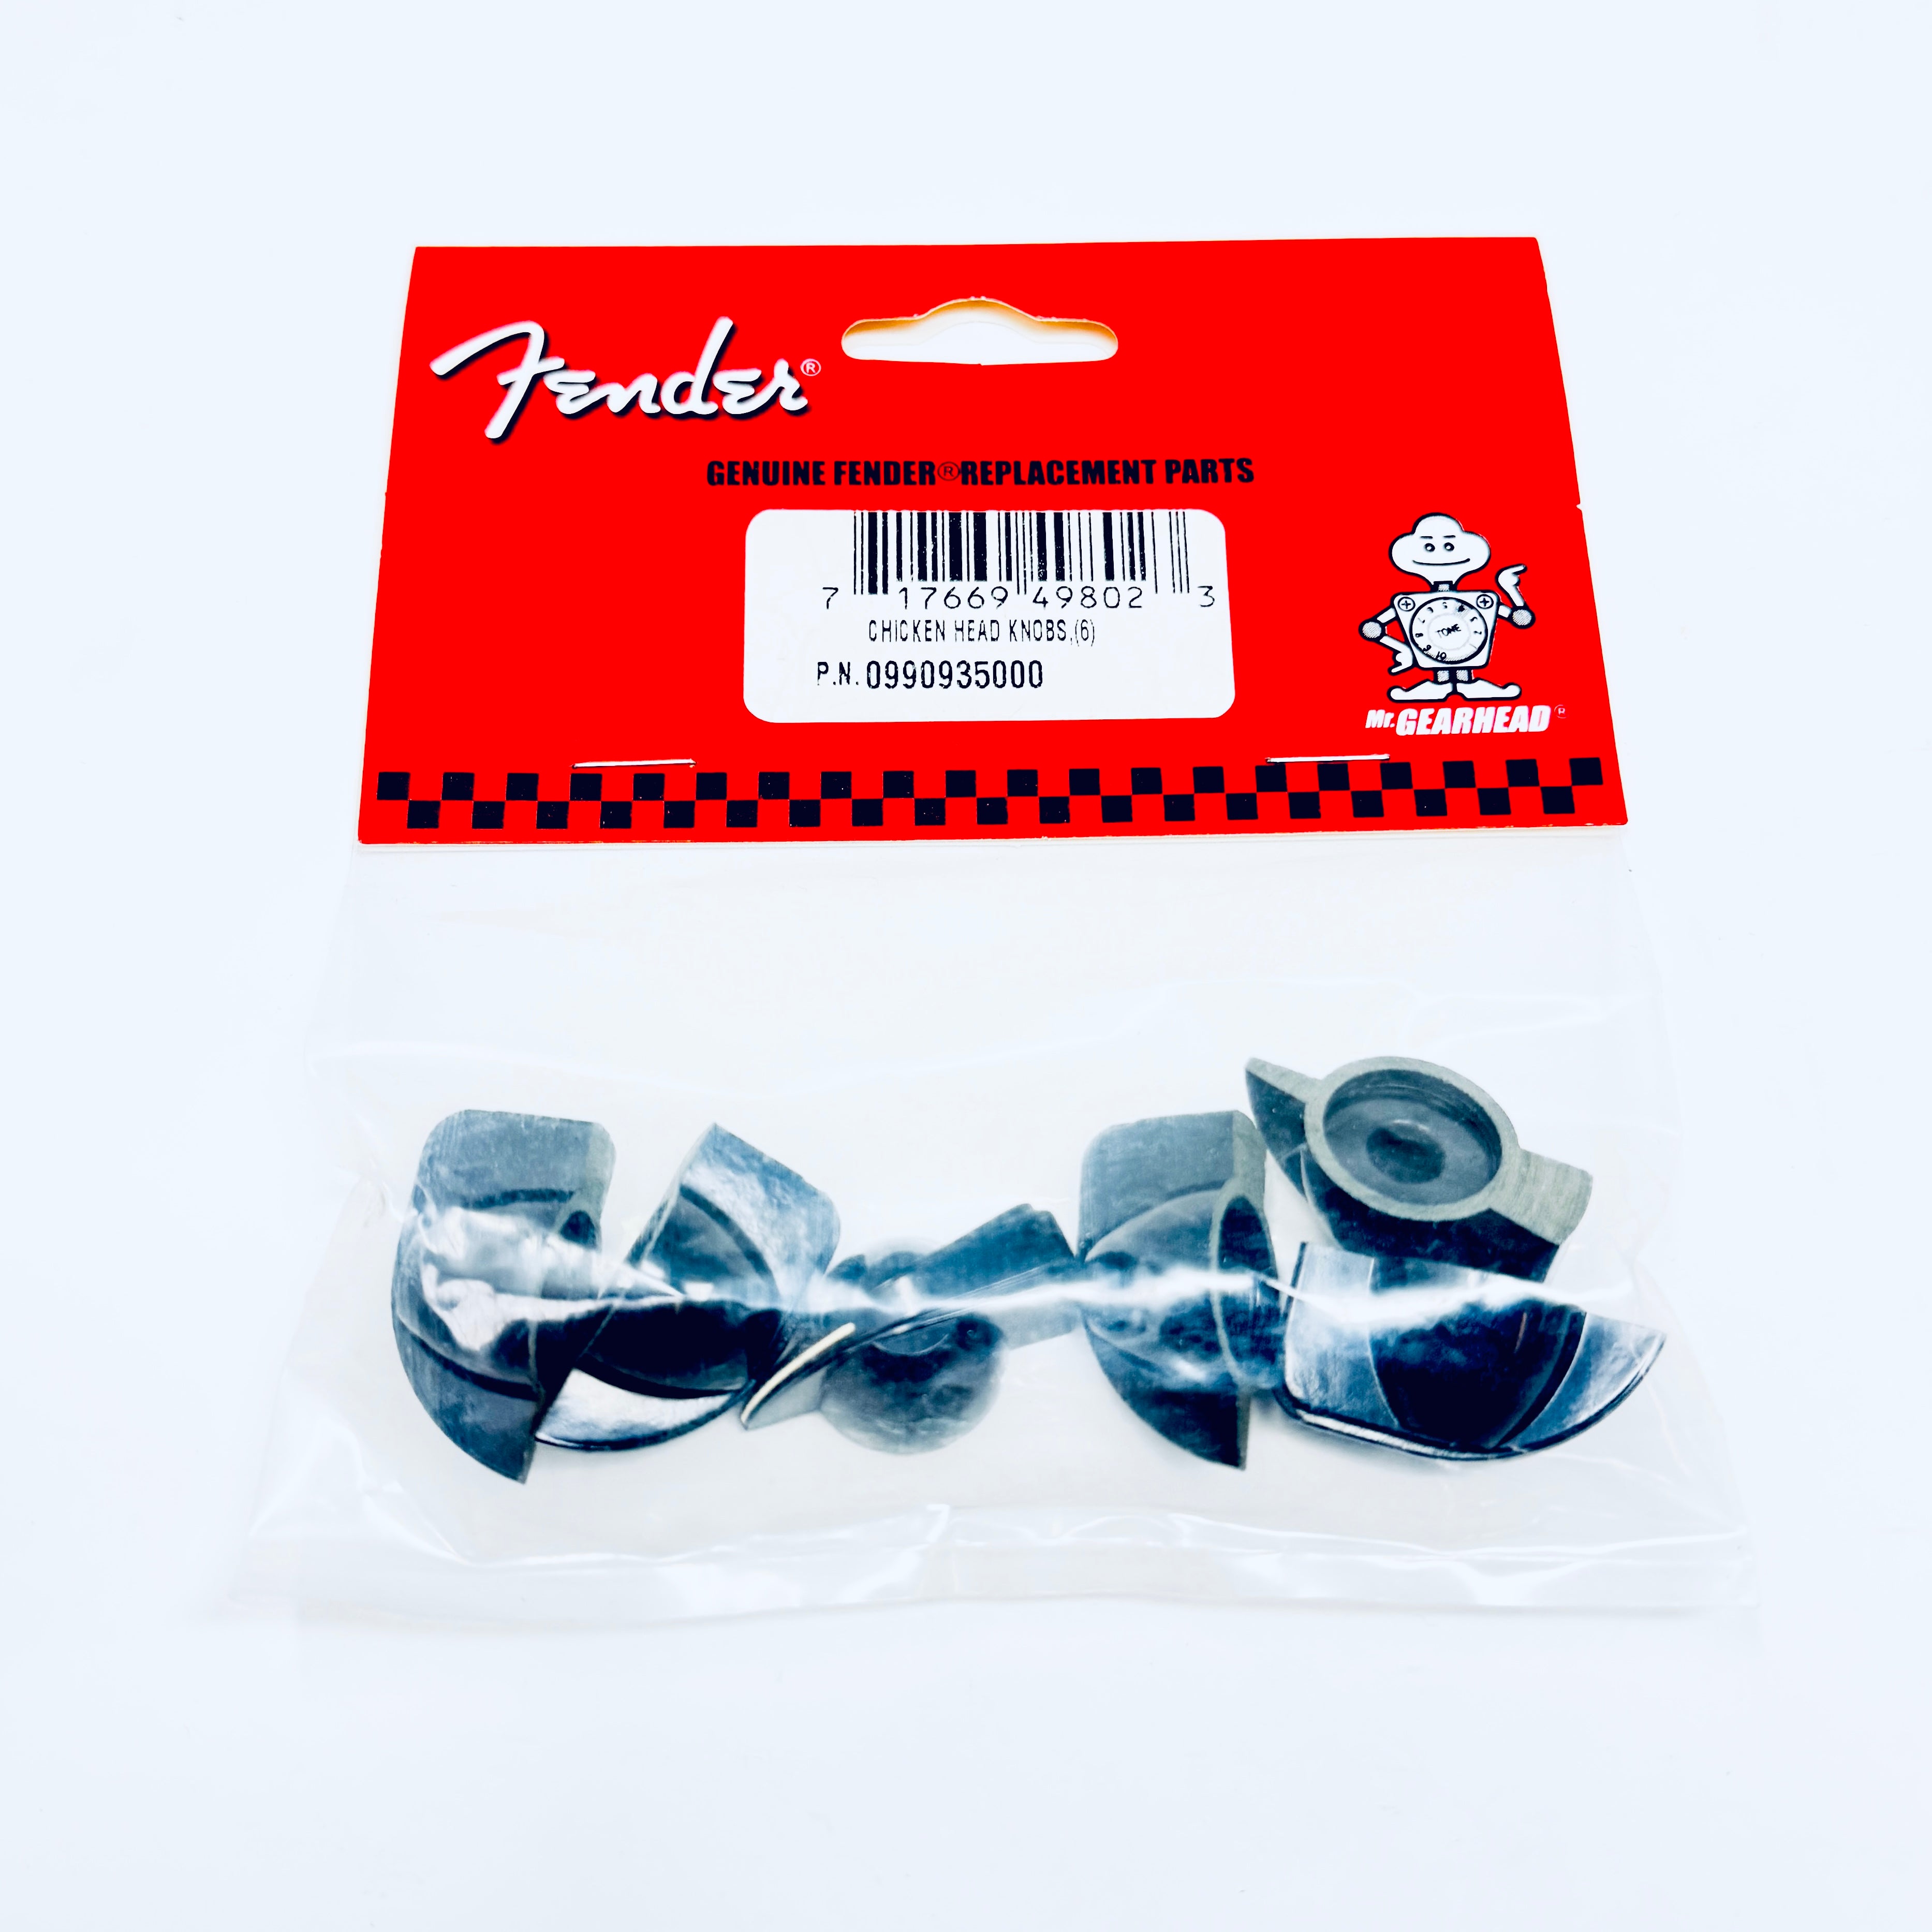 Authentic Fender Black Chicken Head Knobs, authentic fender replacement parts, ruby parts